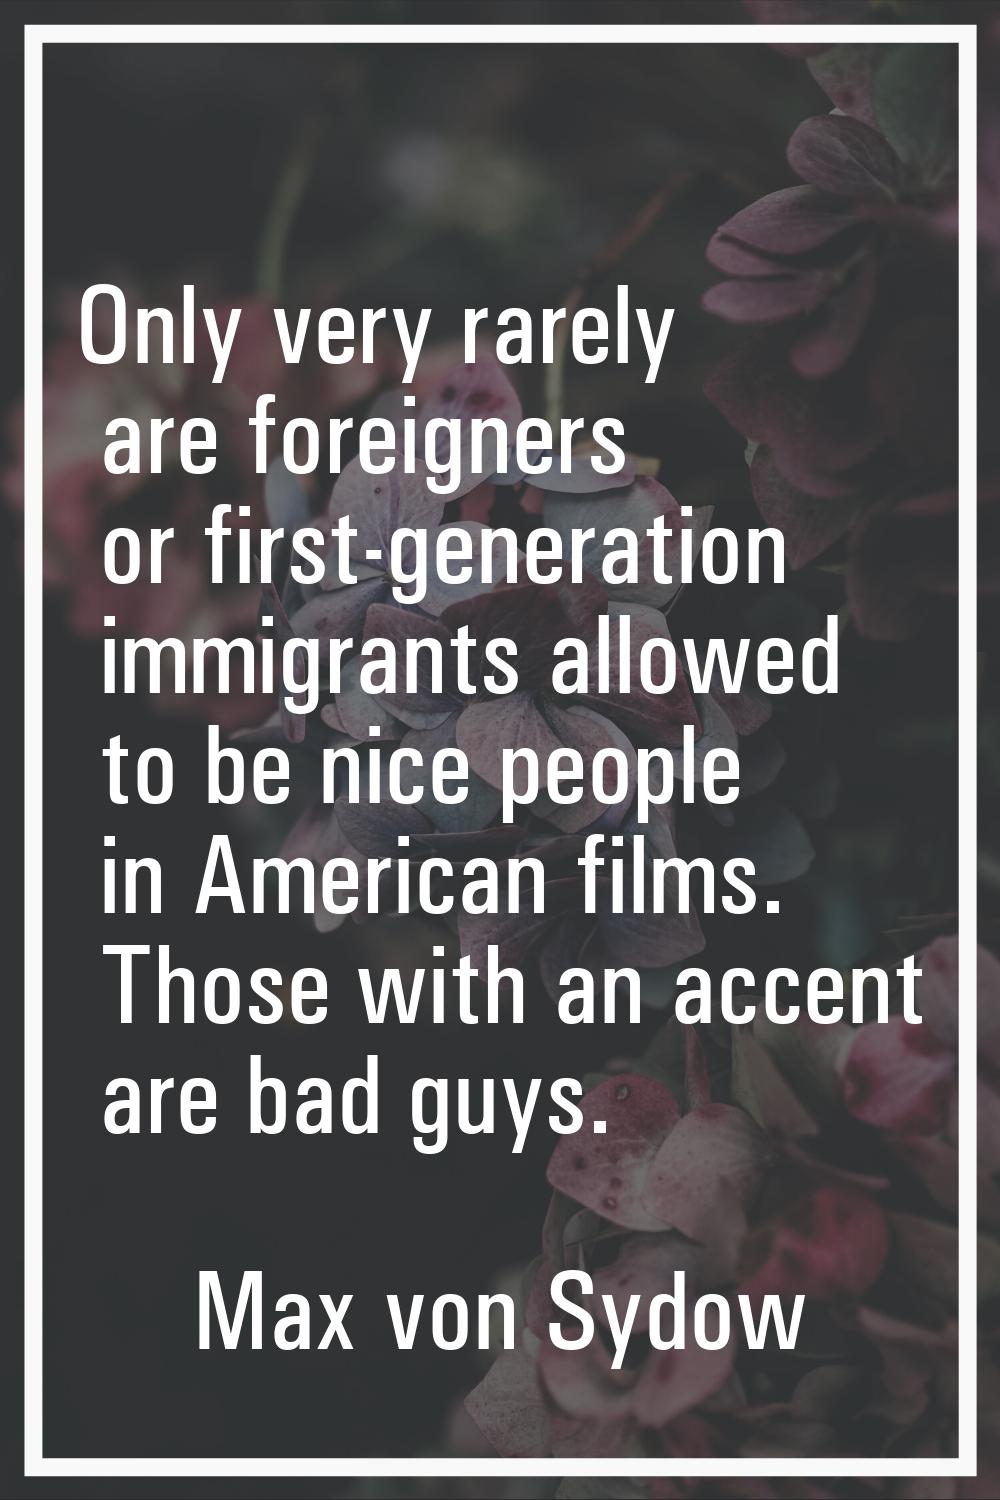 Only very rarely are foreigners or first-generation immigrants allowed to be nice people in America